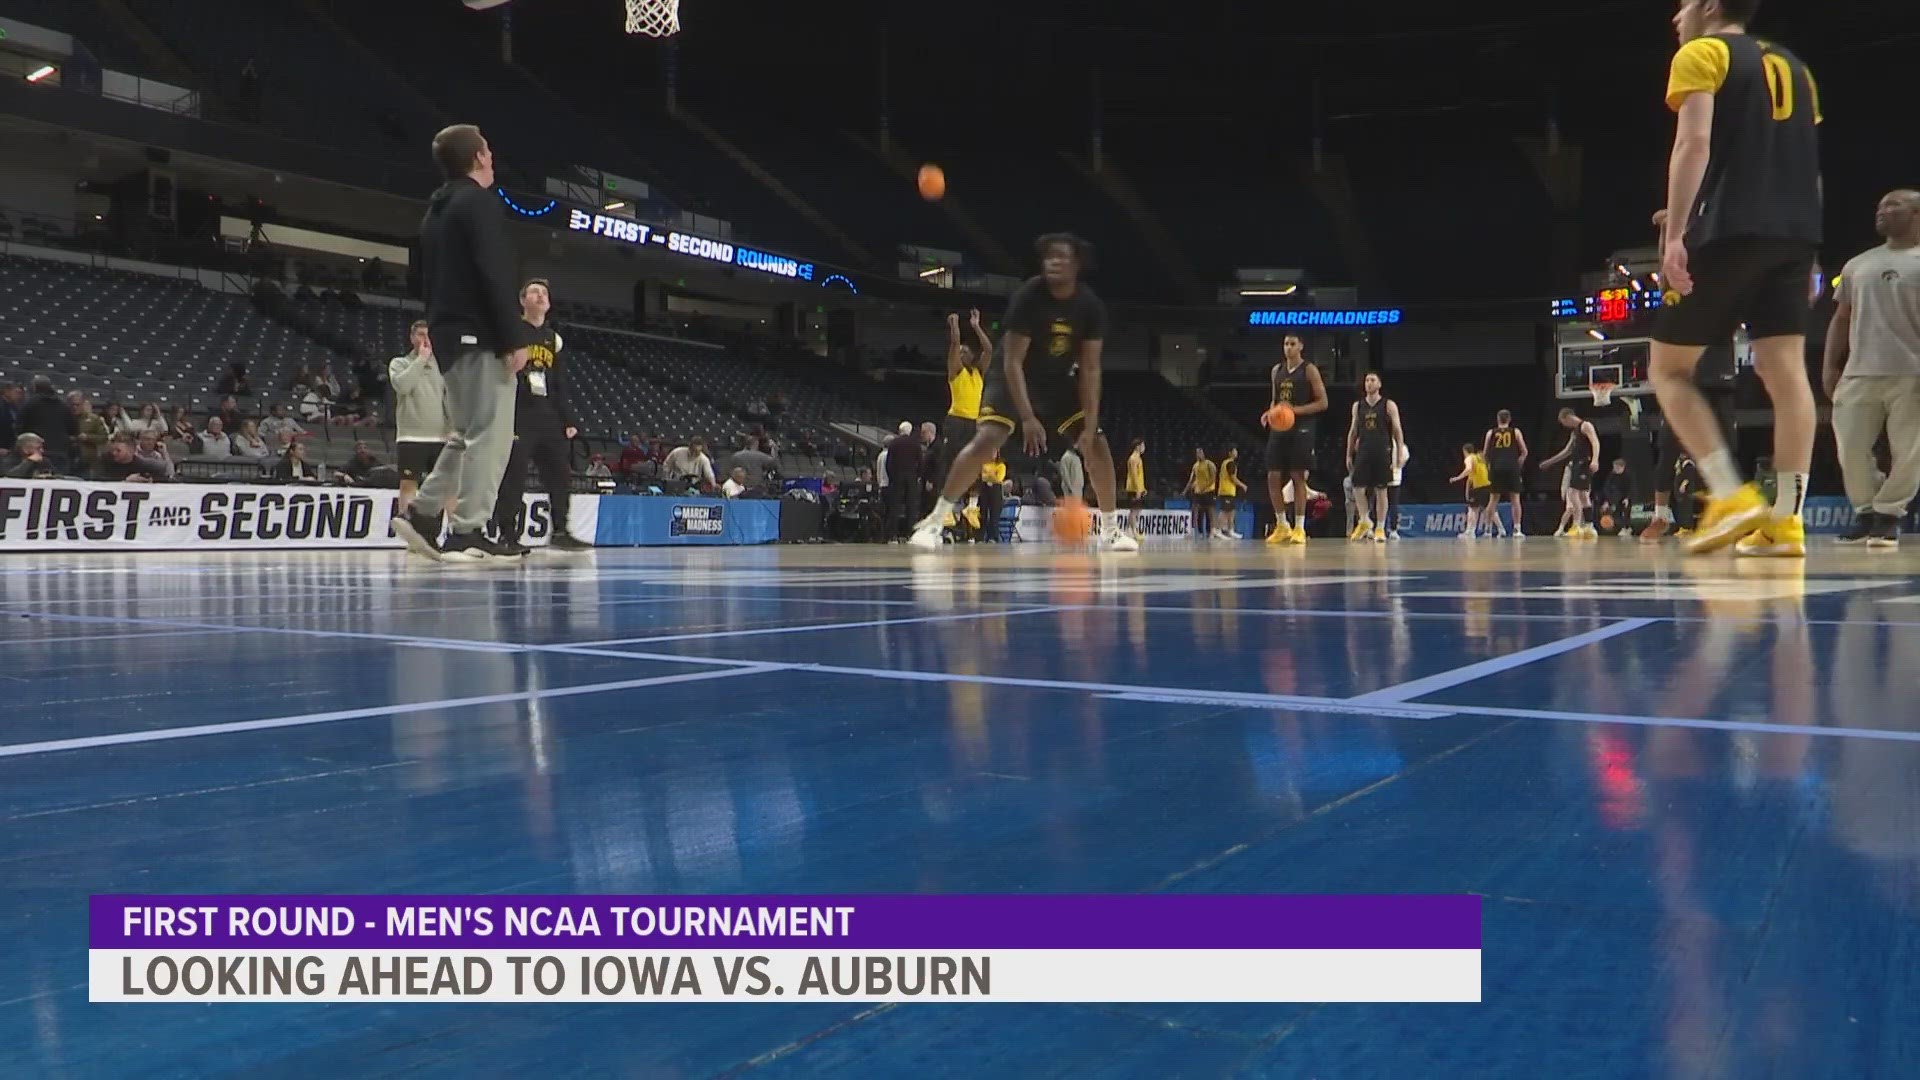 The Iowa men's basketball team will face Auburn in their first game of the tournament. Plus, get a look at how fans are faring at the tournament in Des Moines.